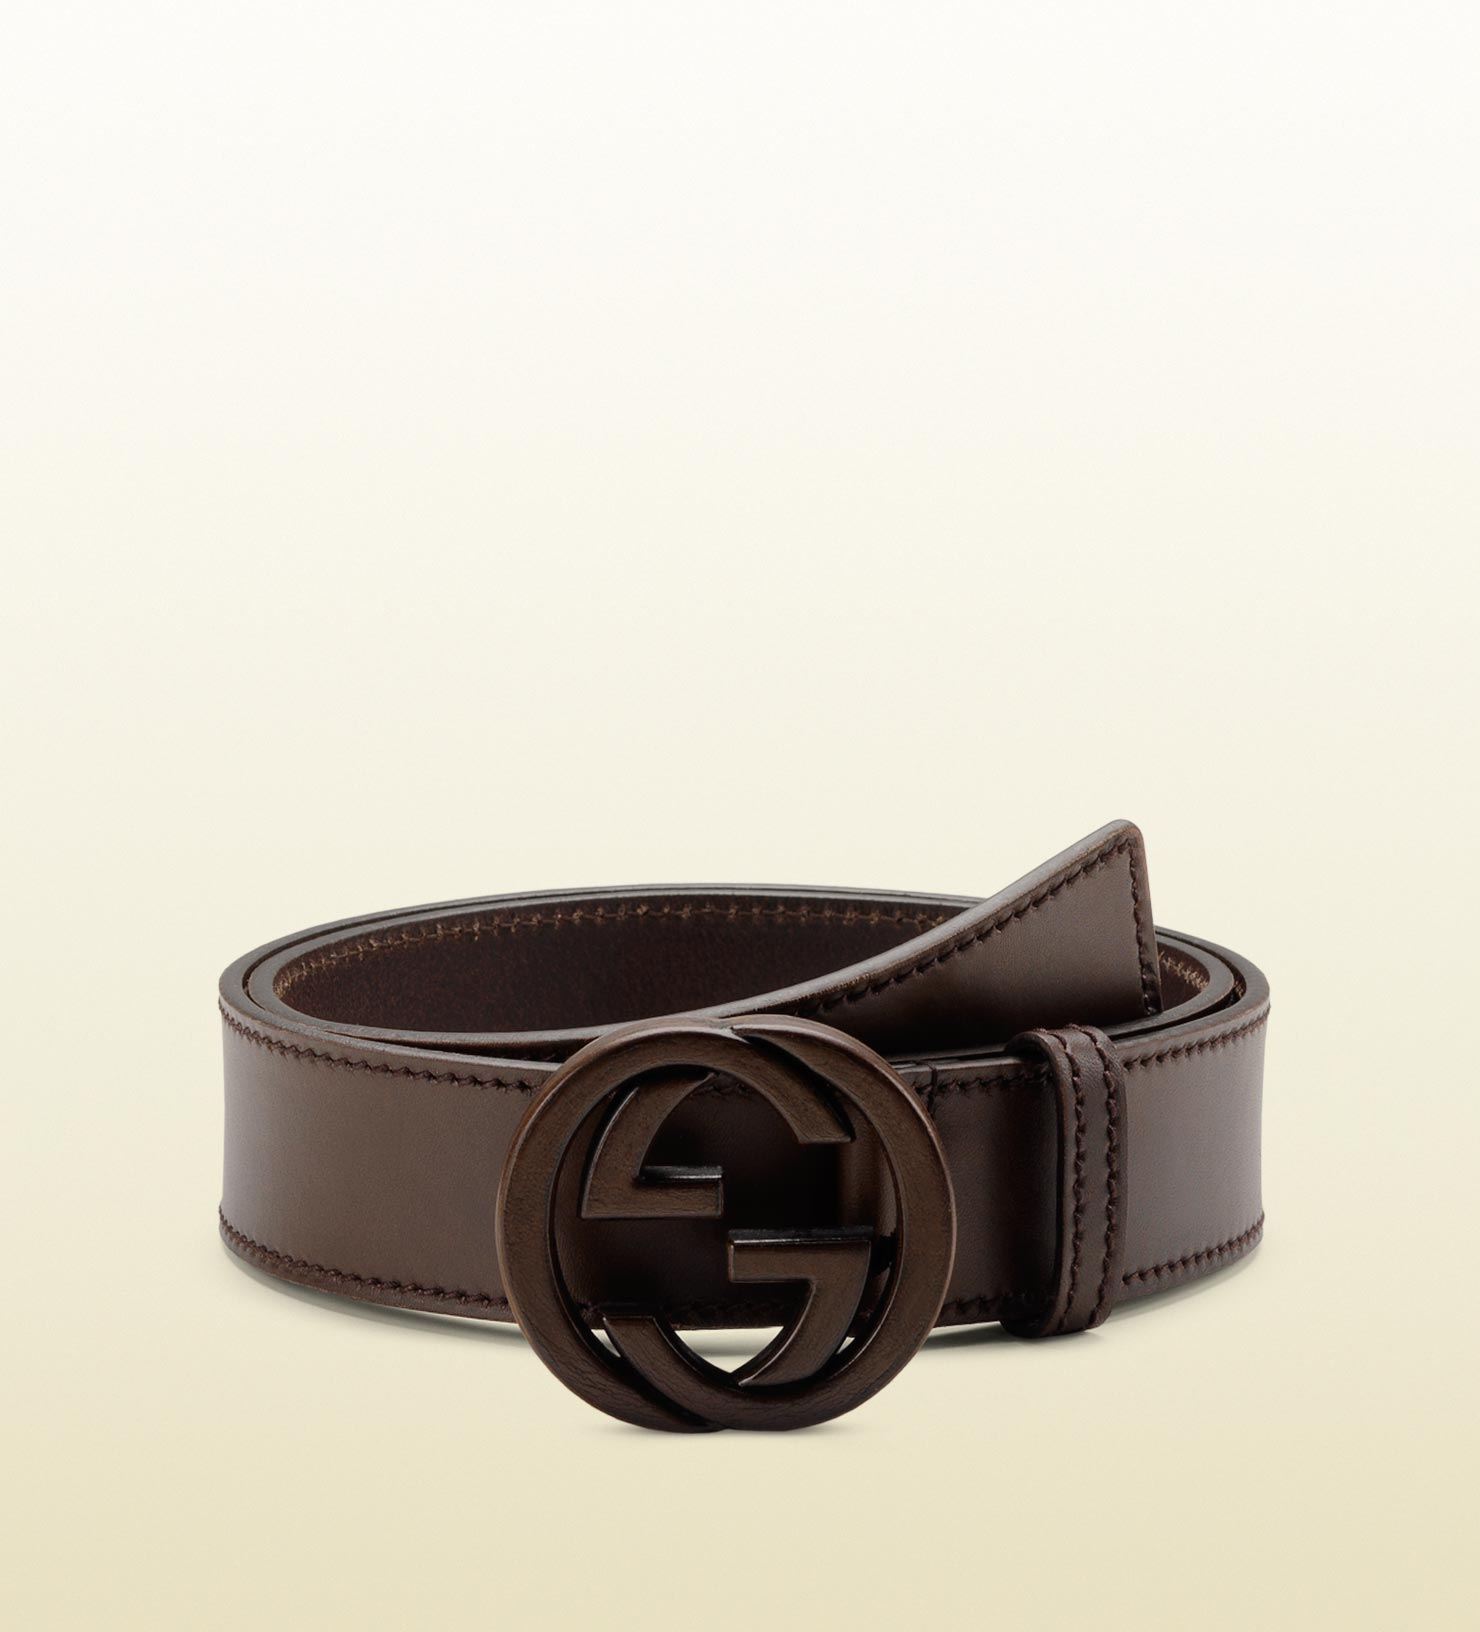 Gucci Belt with Leather Interlocking G Buckle in Brown for Men - Lyst